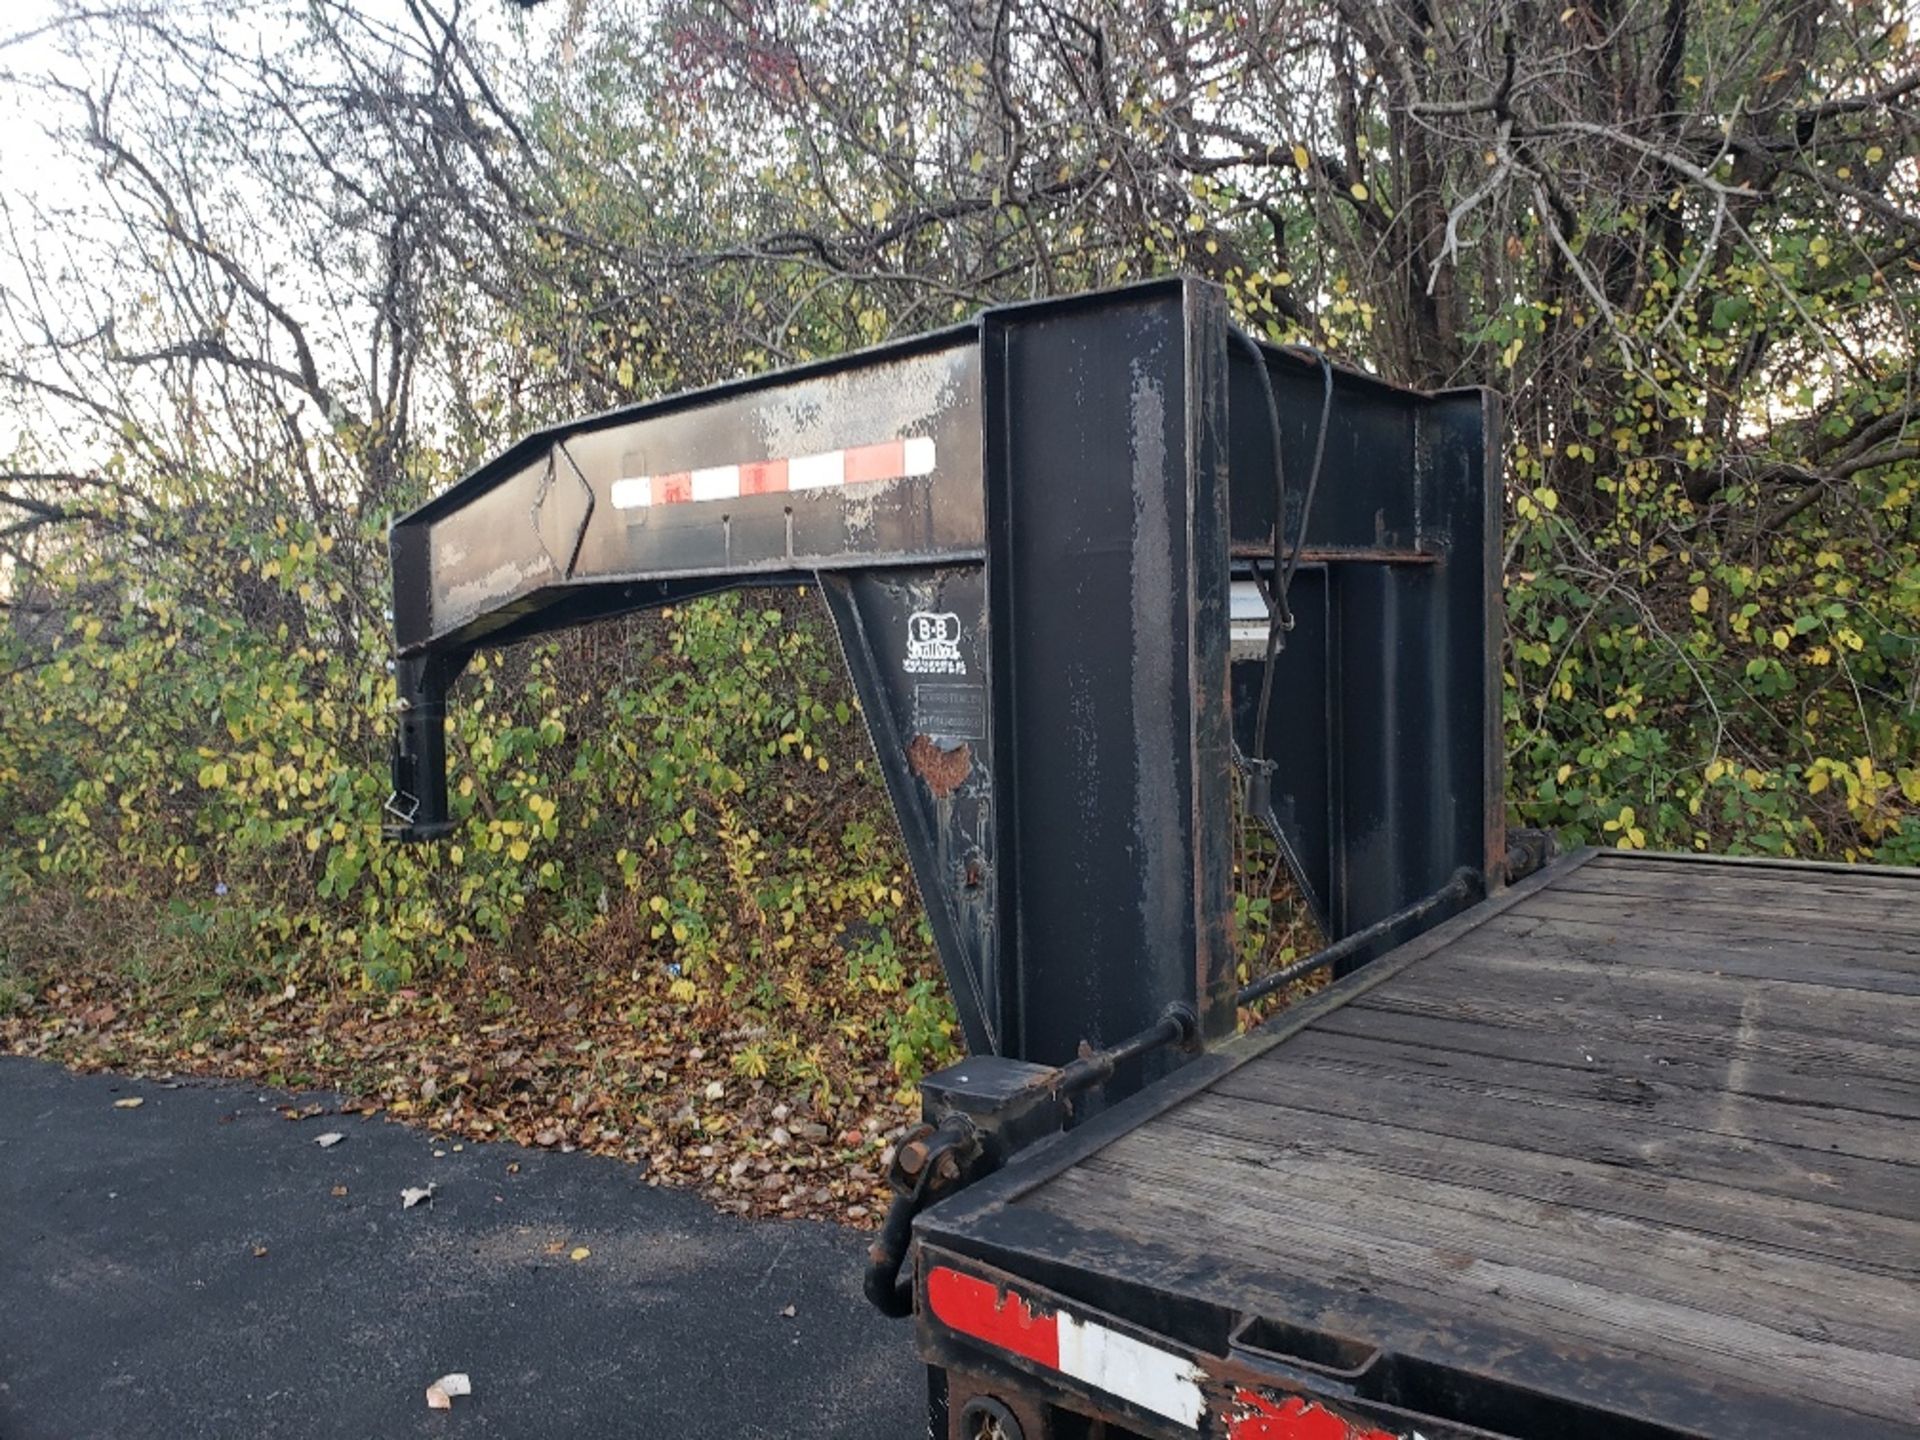 2008 25' B & D GOOSENECK TRAILER, TANDEM AXLE, POP-UP 5' BEAVER TAIL, WITH RAMPS - Image 12 of 14